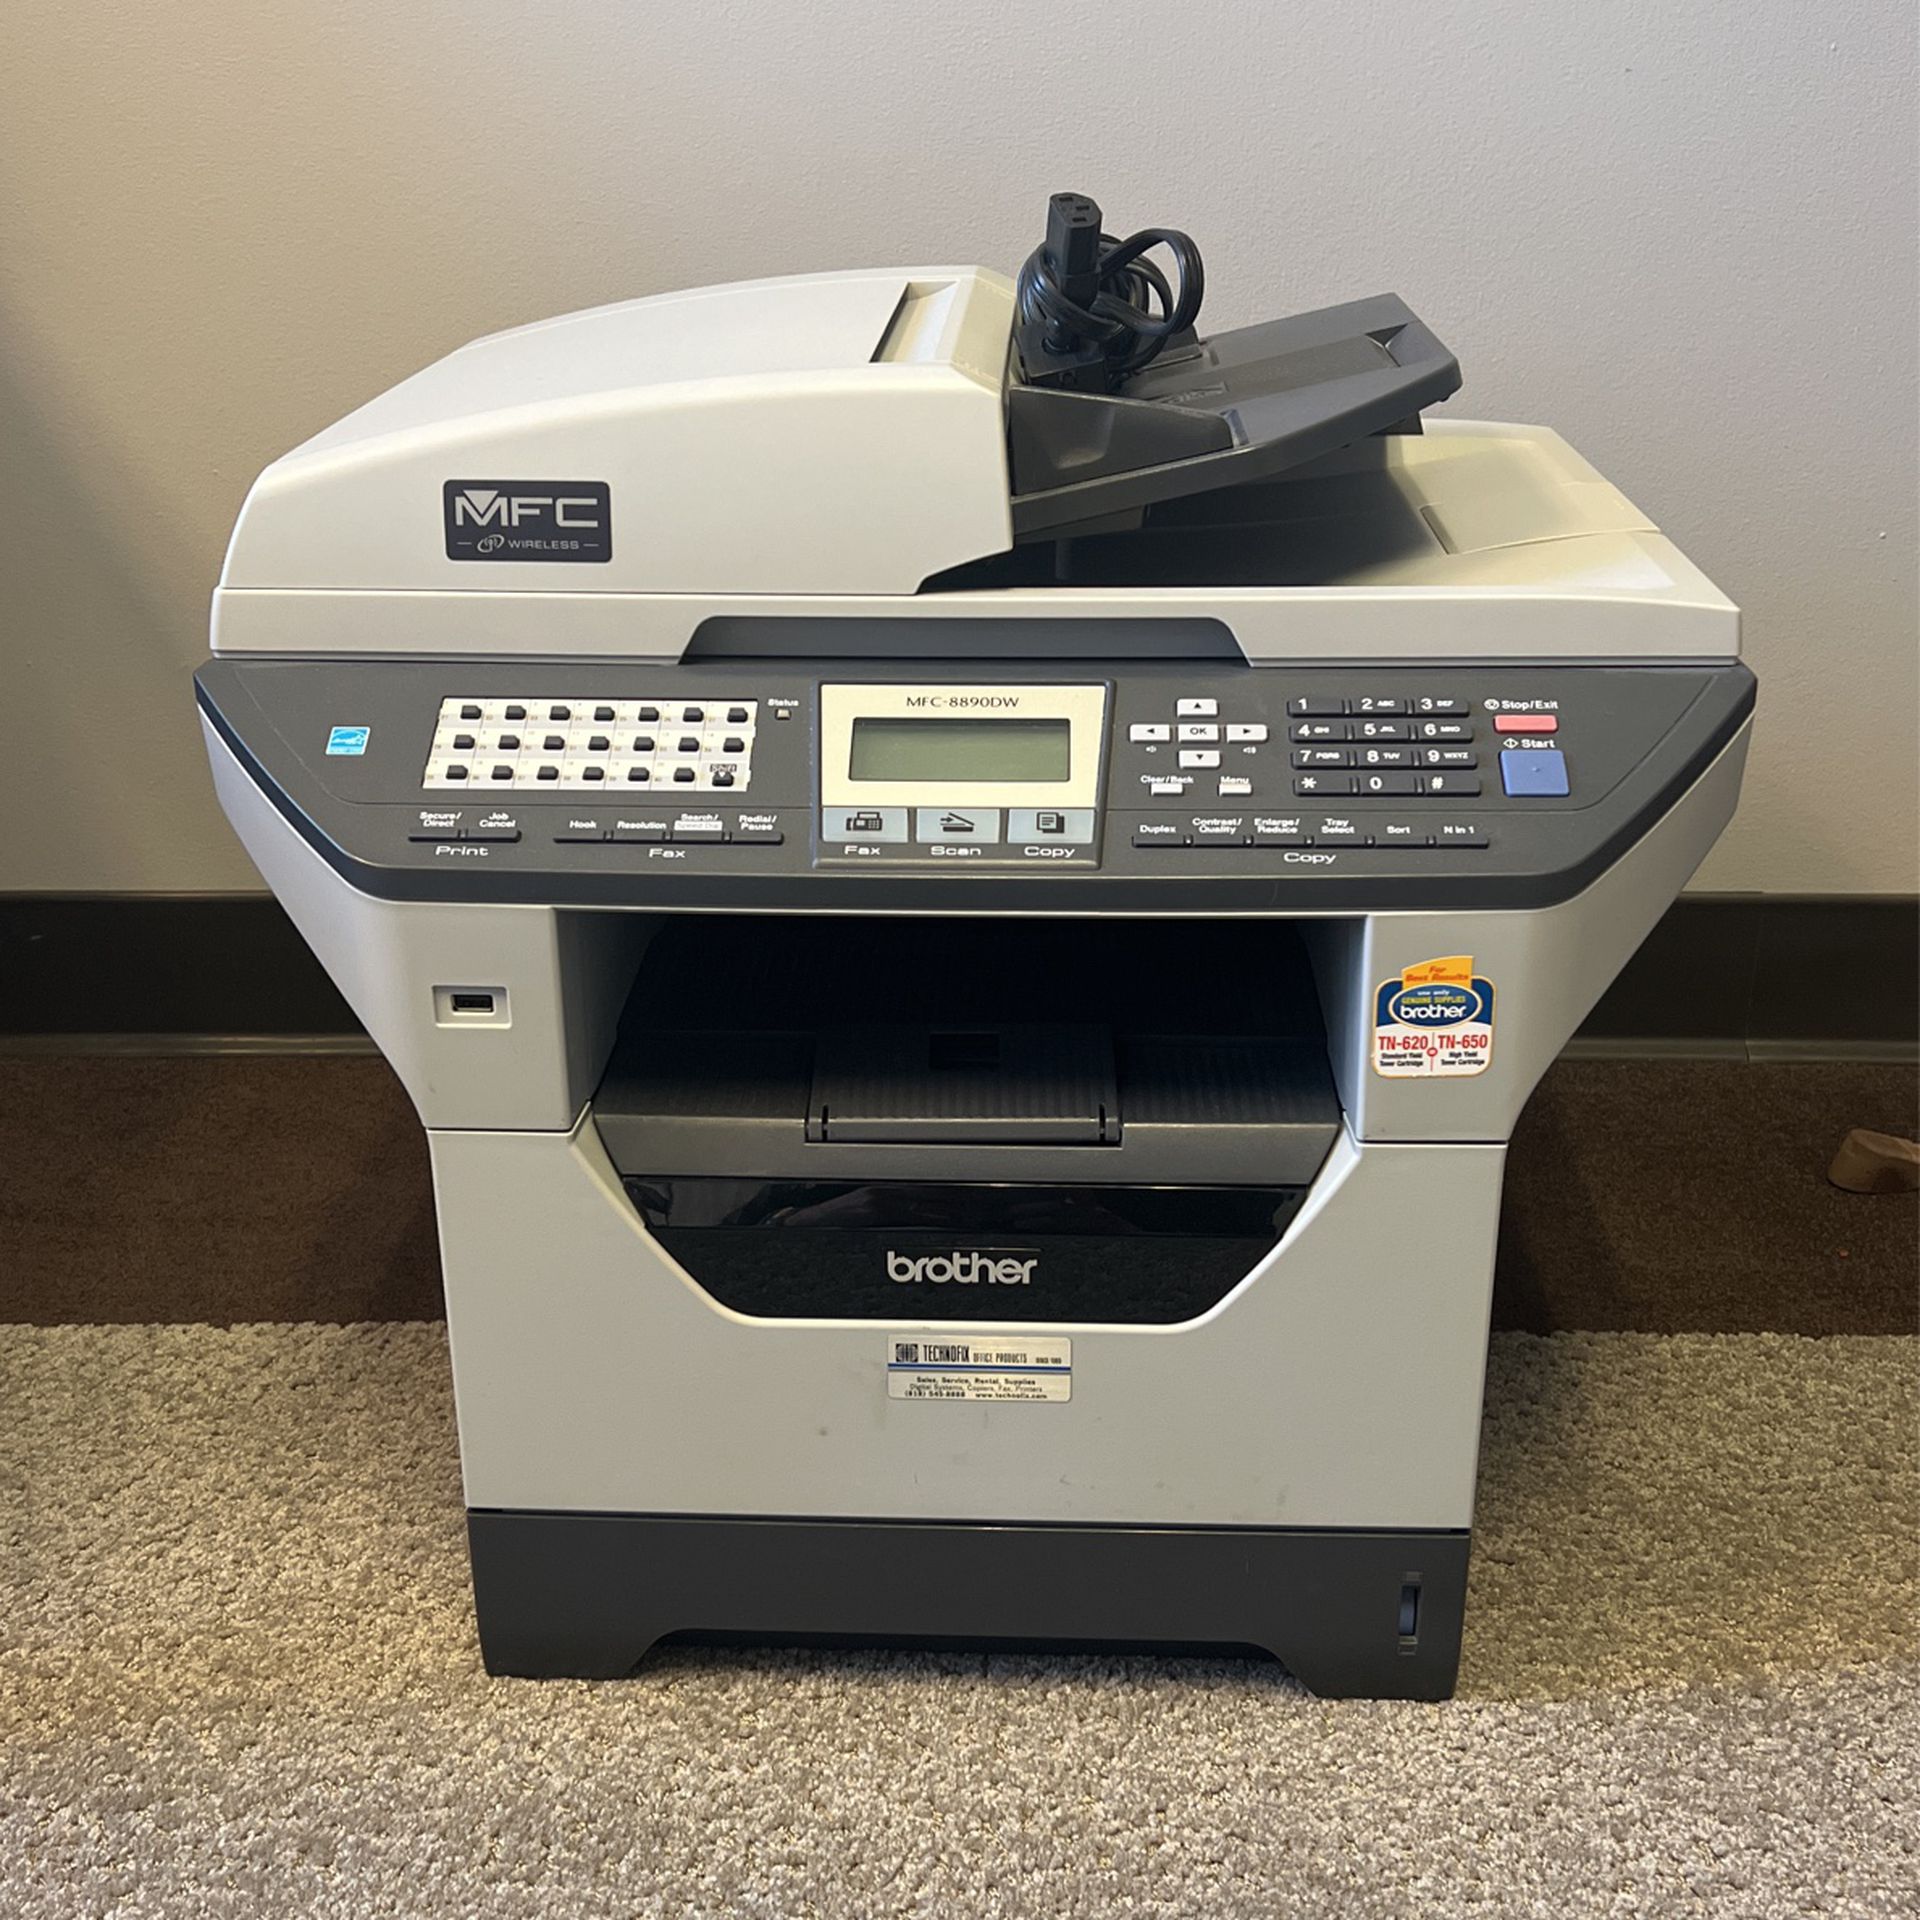 Brother MFC-8890DW Multi-function Laser Printer 